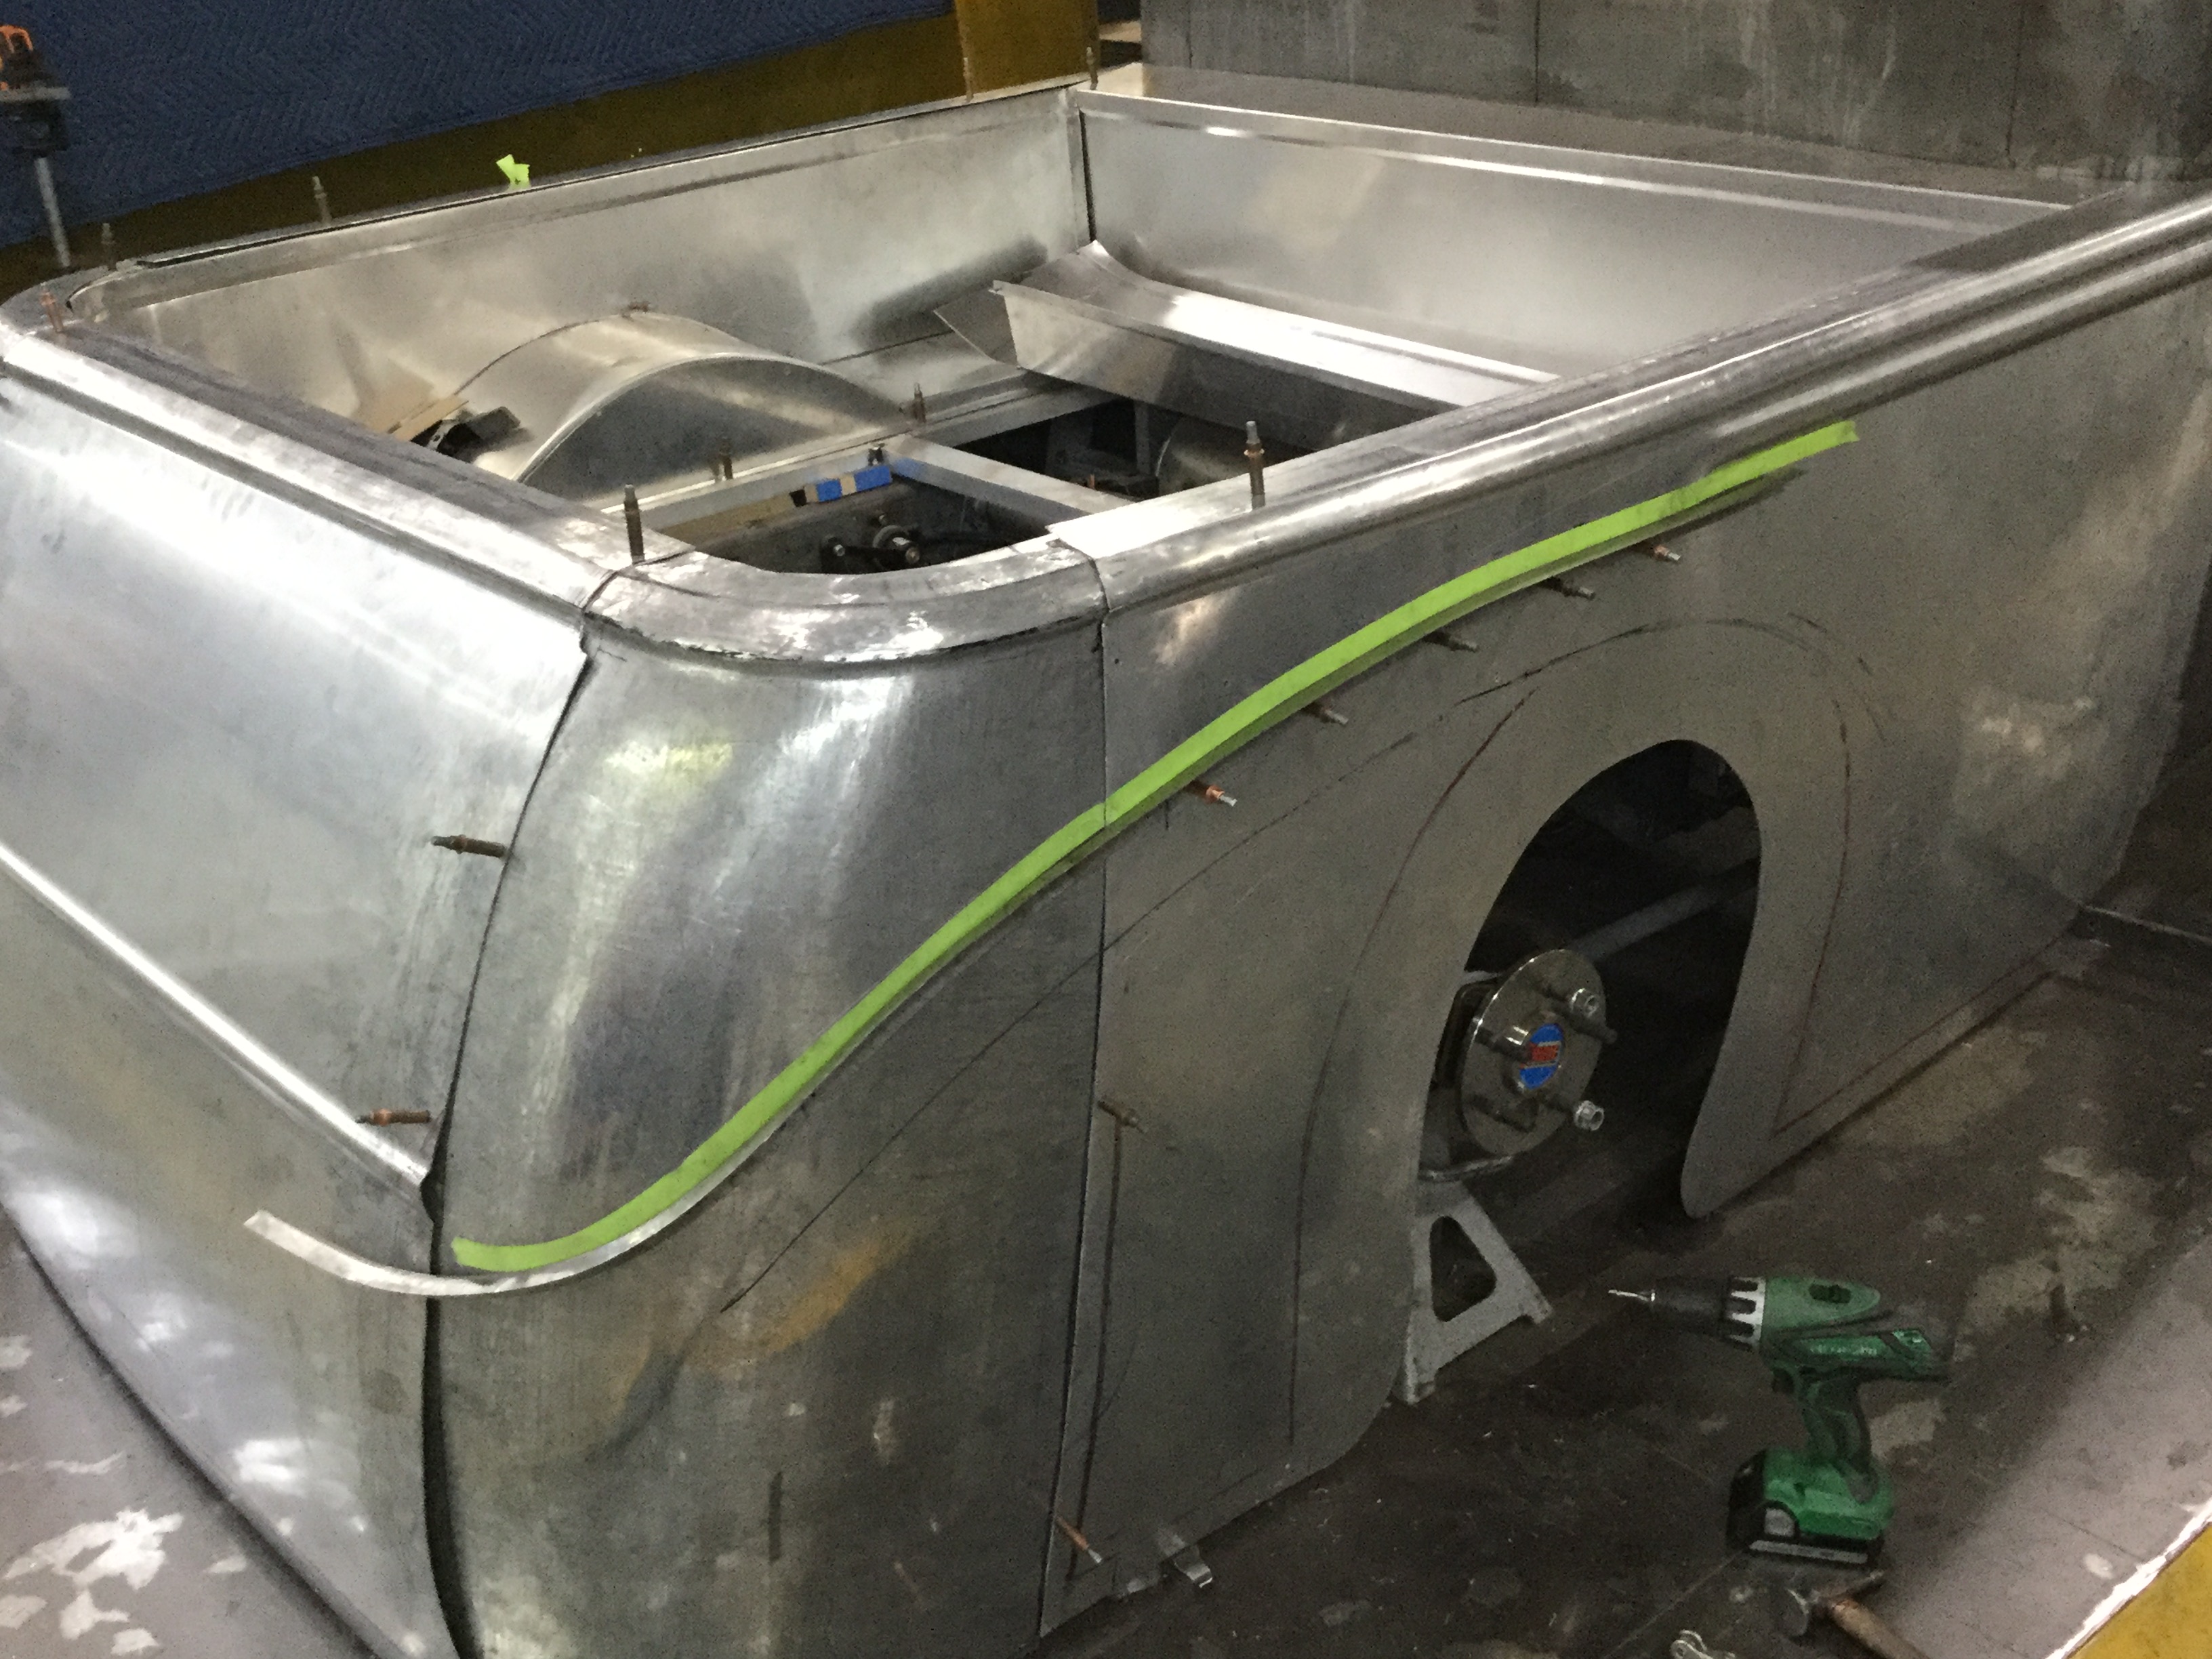 1937 Zephyr Coupe before metal forming